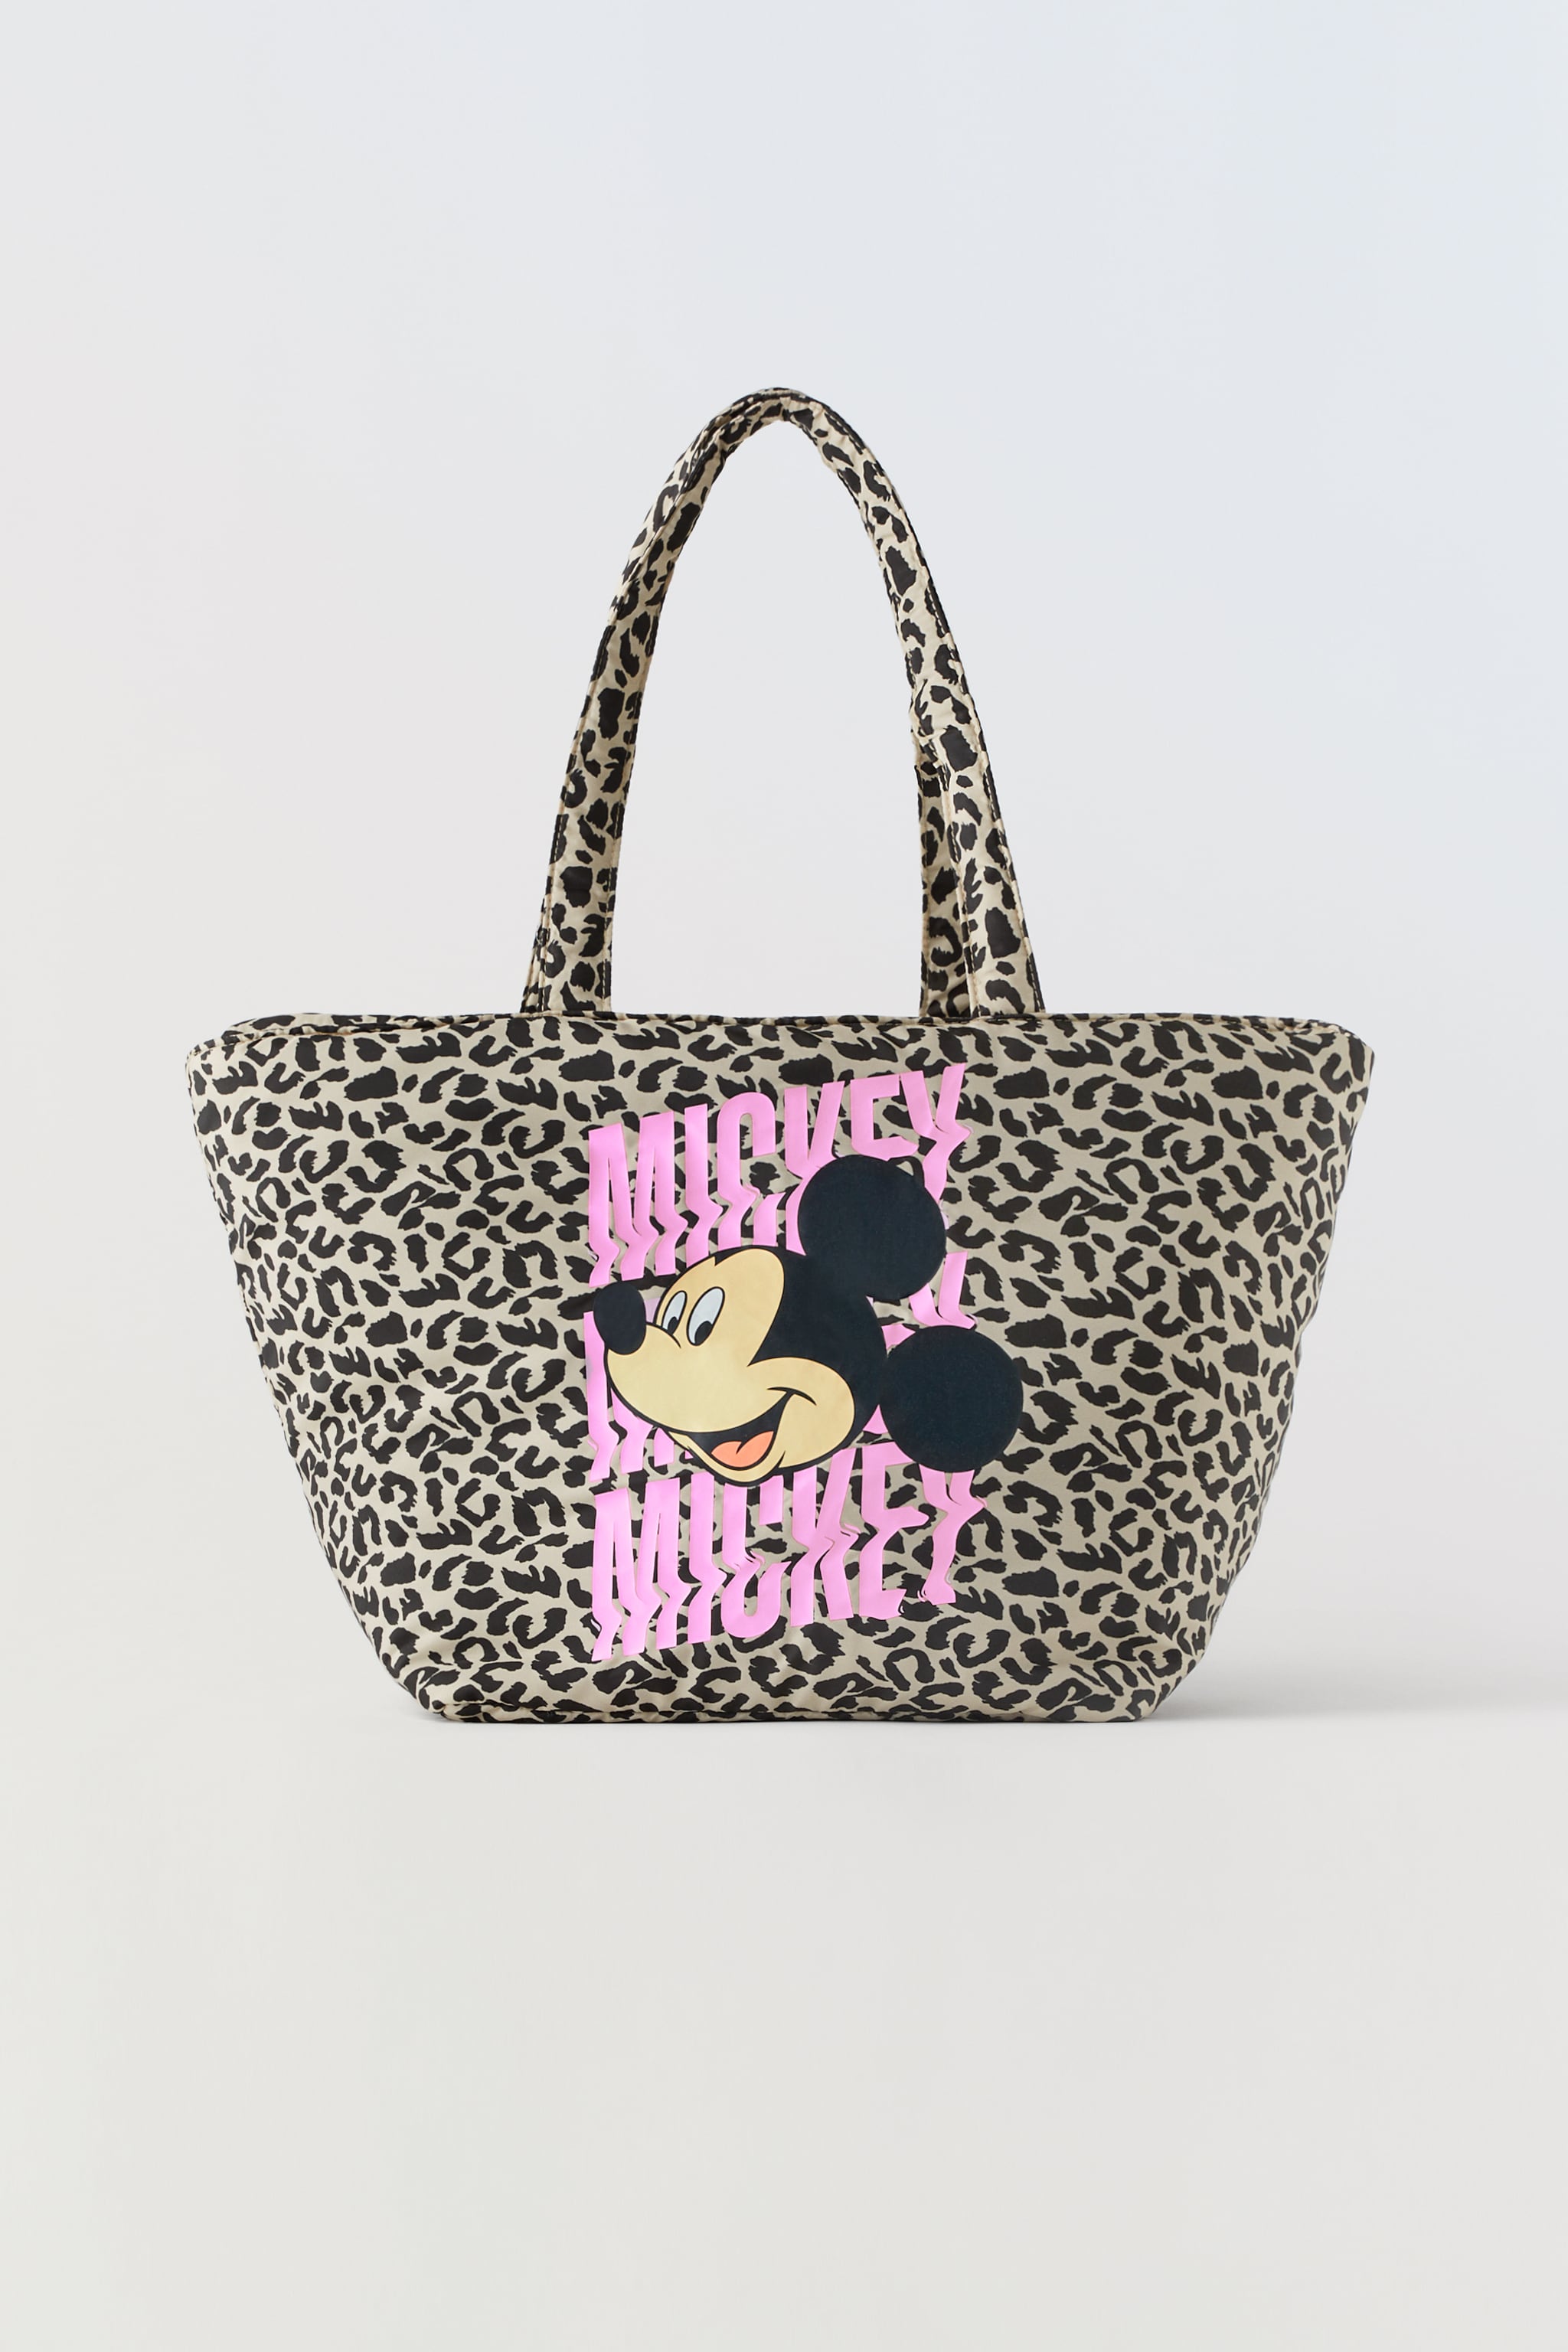 MICKEY MOUSE © DISNEY 100TH ANNIVERSARY TOTE BAG